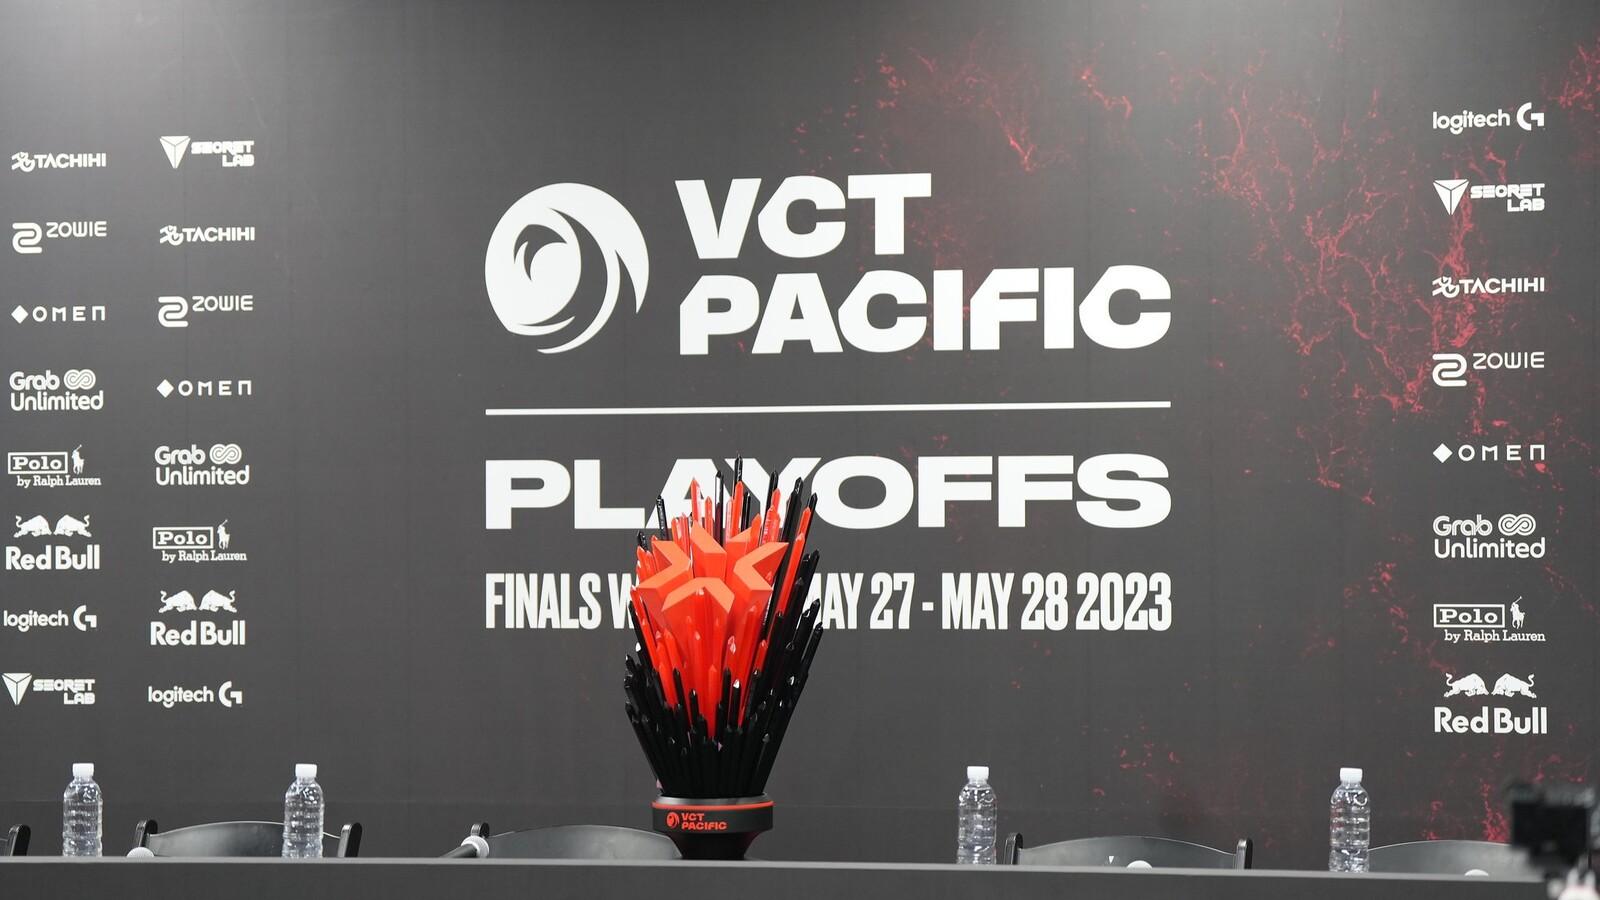 VCT Pacific trophy